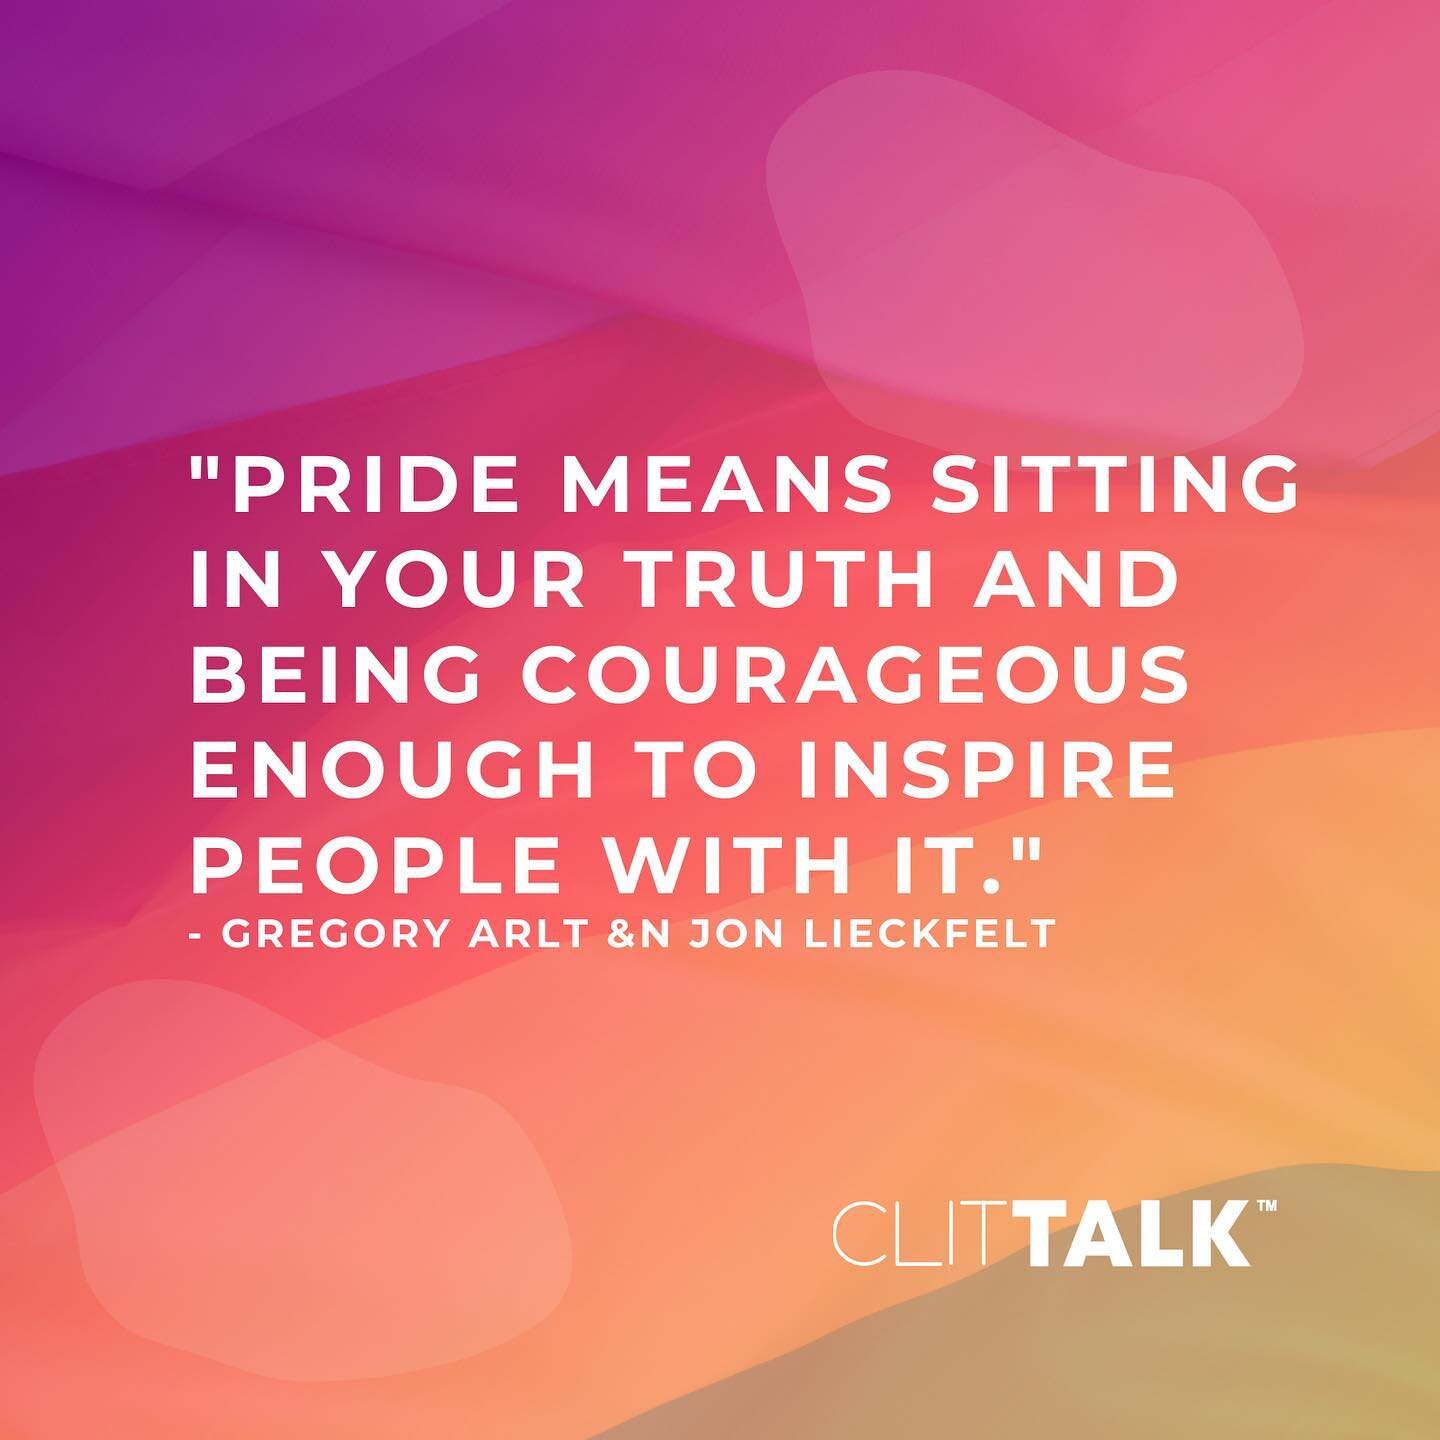 Gregory and Jon blew us away in their interview. This may perhaps be the most hilarious and deep episode we&rsquo;ve ever done&hellip; and WOW did we learn a lot about what PRIDE is really all about. 

Listen to this exclusive episode of Clit Talk. 
